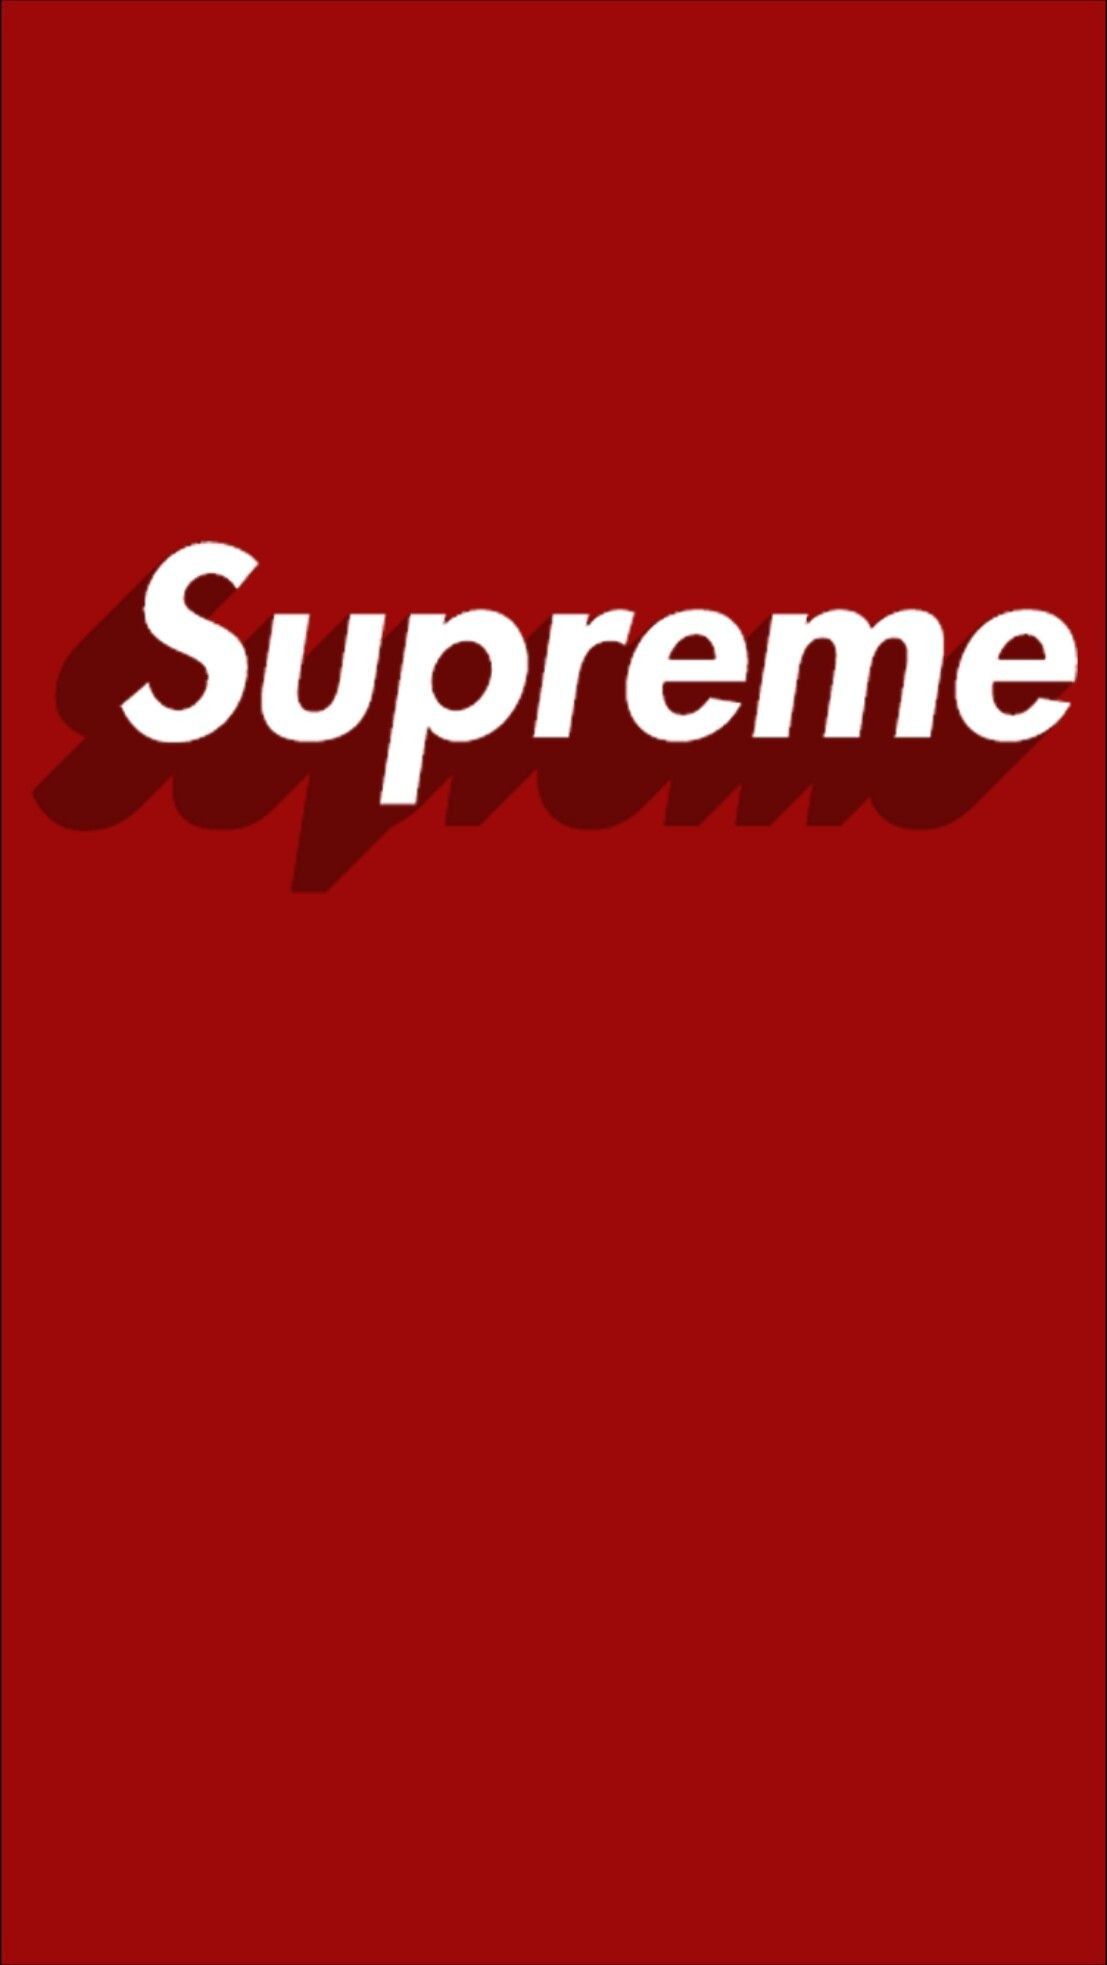 Coolest Supreme Wallpapers Wallpapers